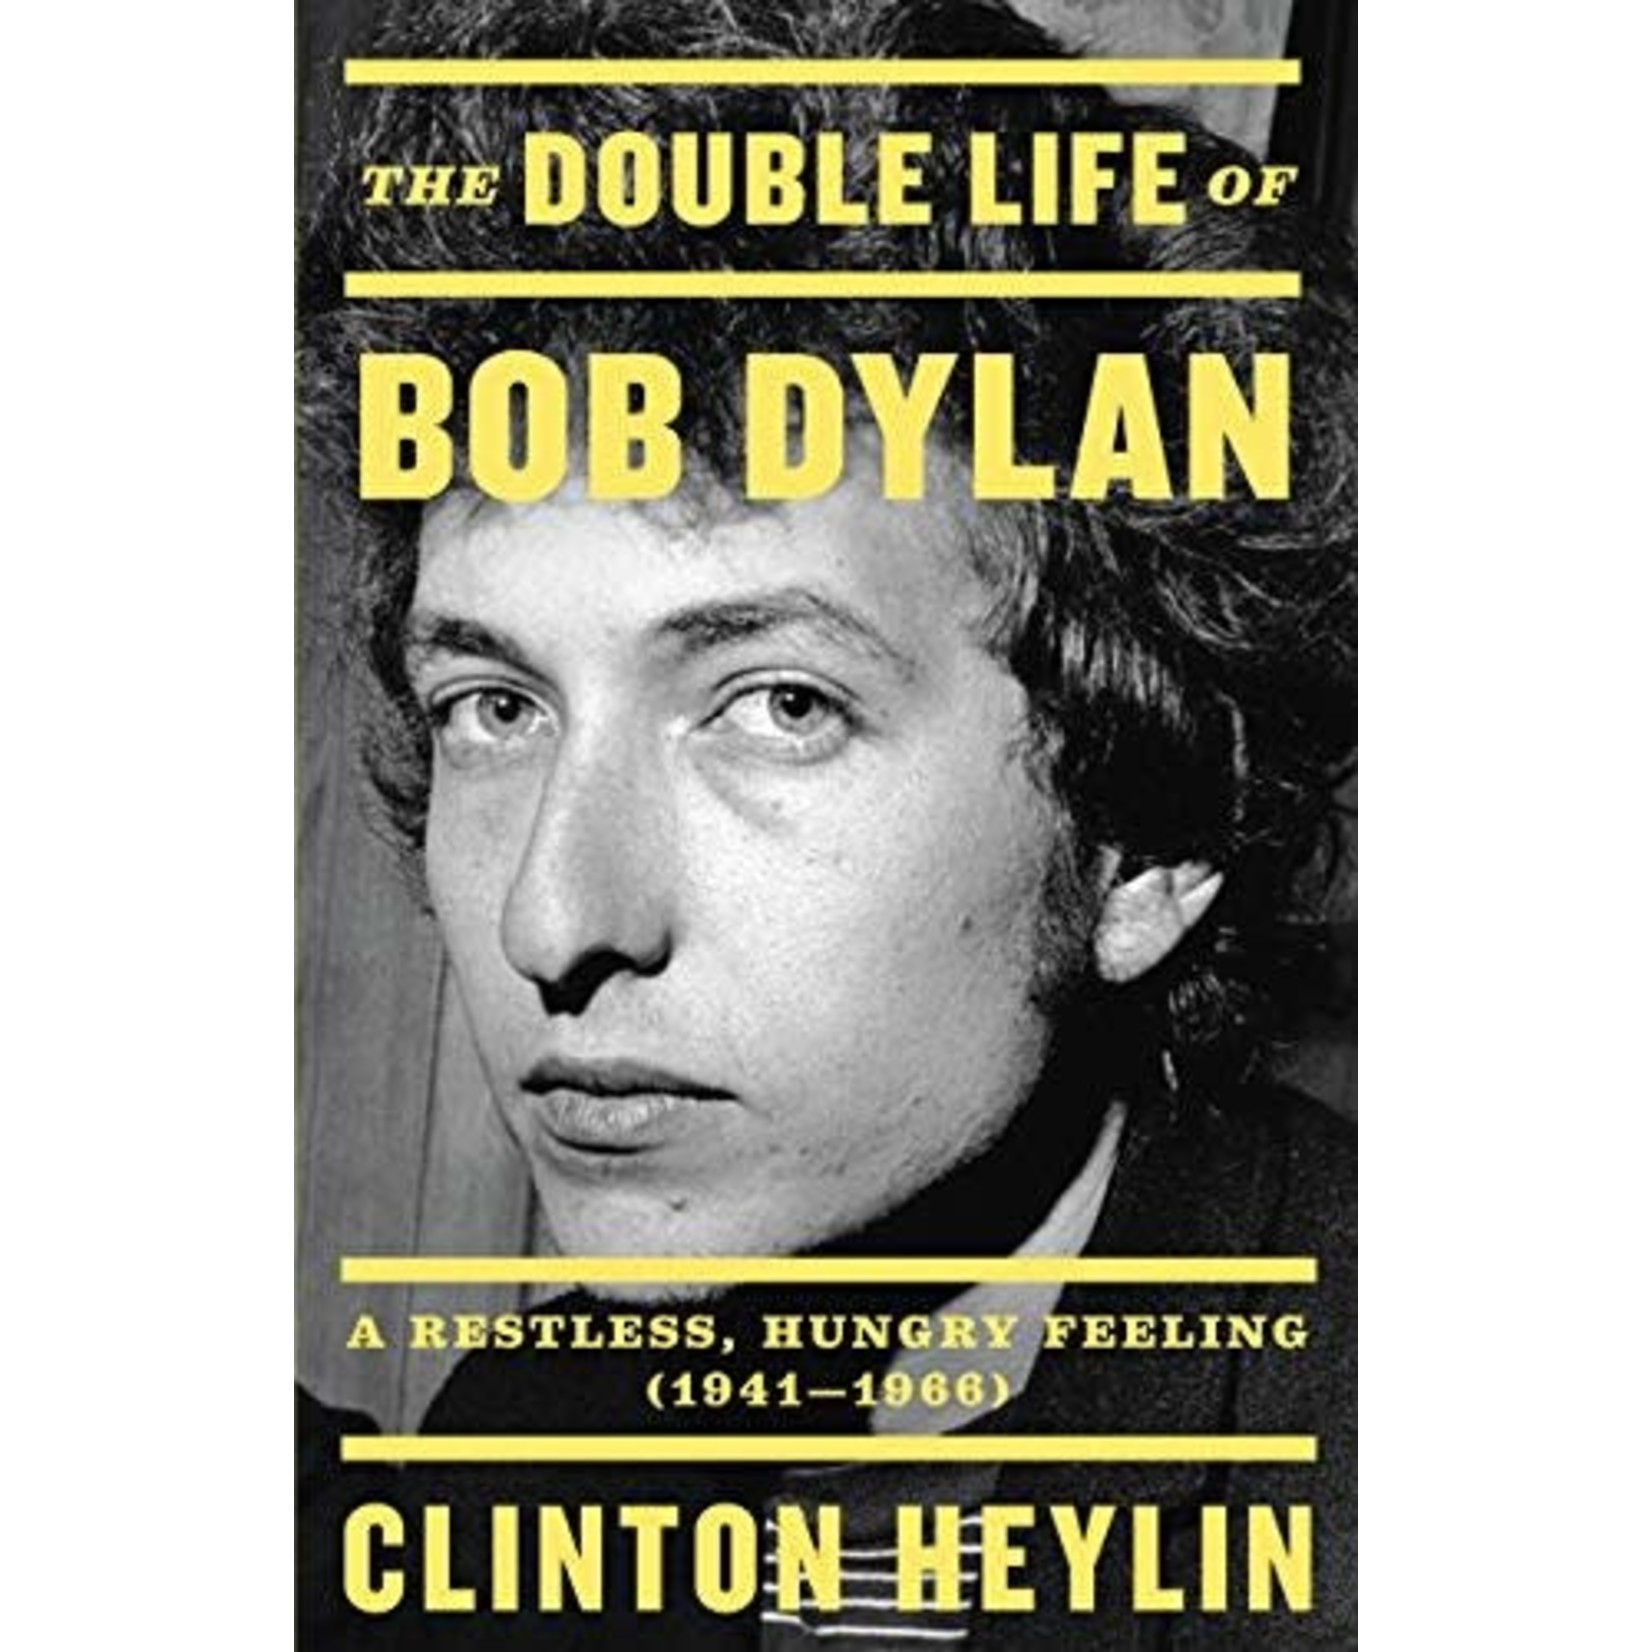 Bob Dylan - The Double Life Of Bob Dylan: A Restless, Hungry Feeling 1941-1966 [Book]